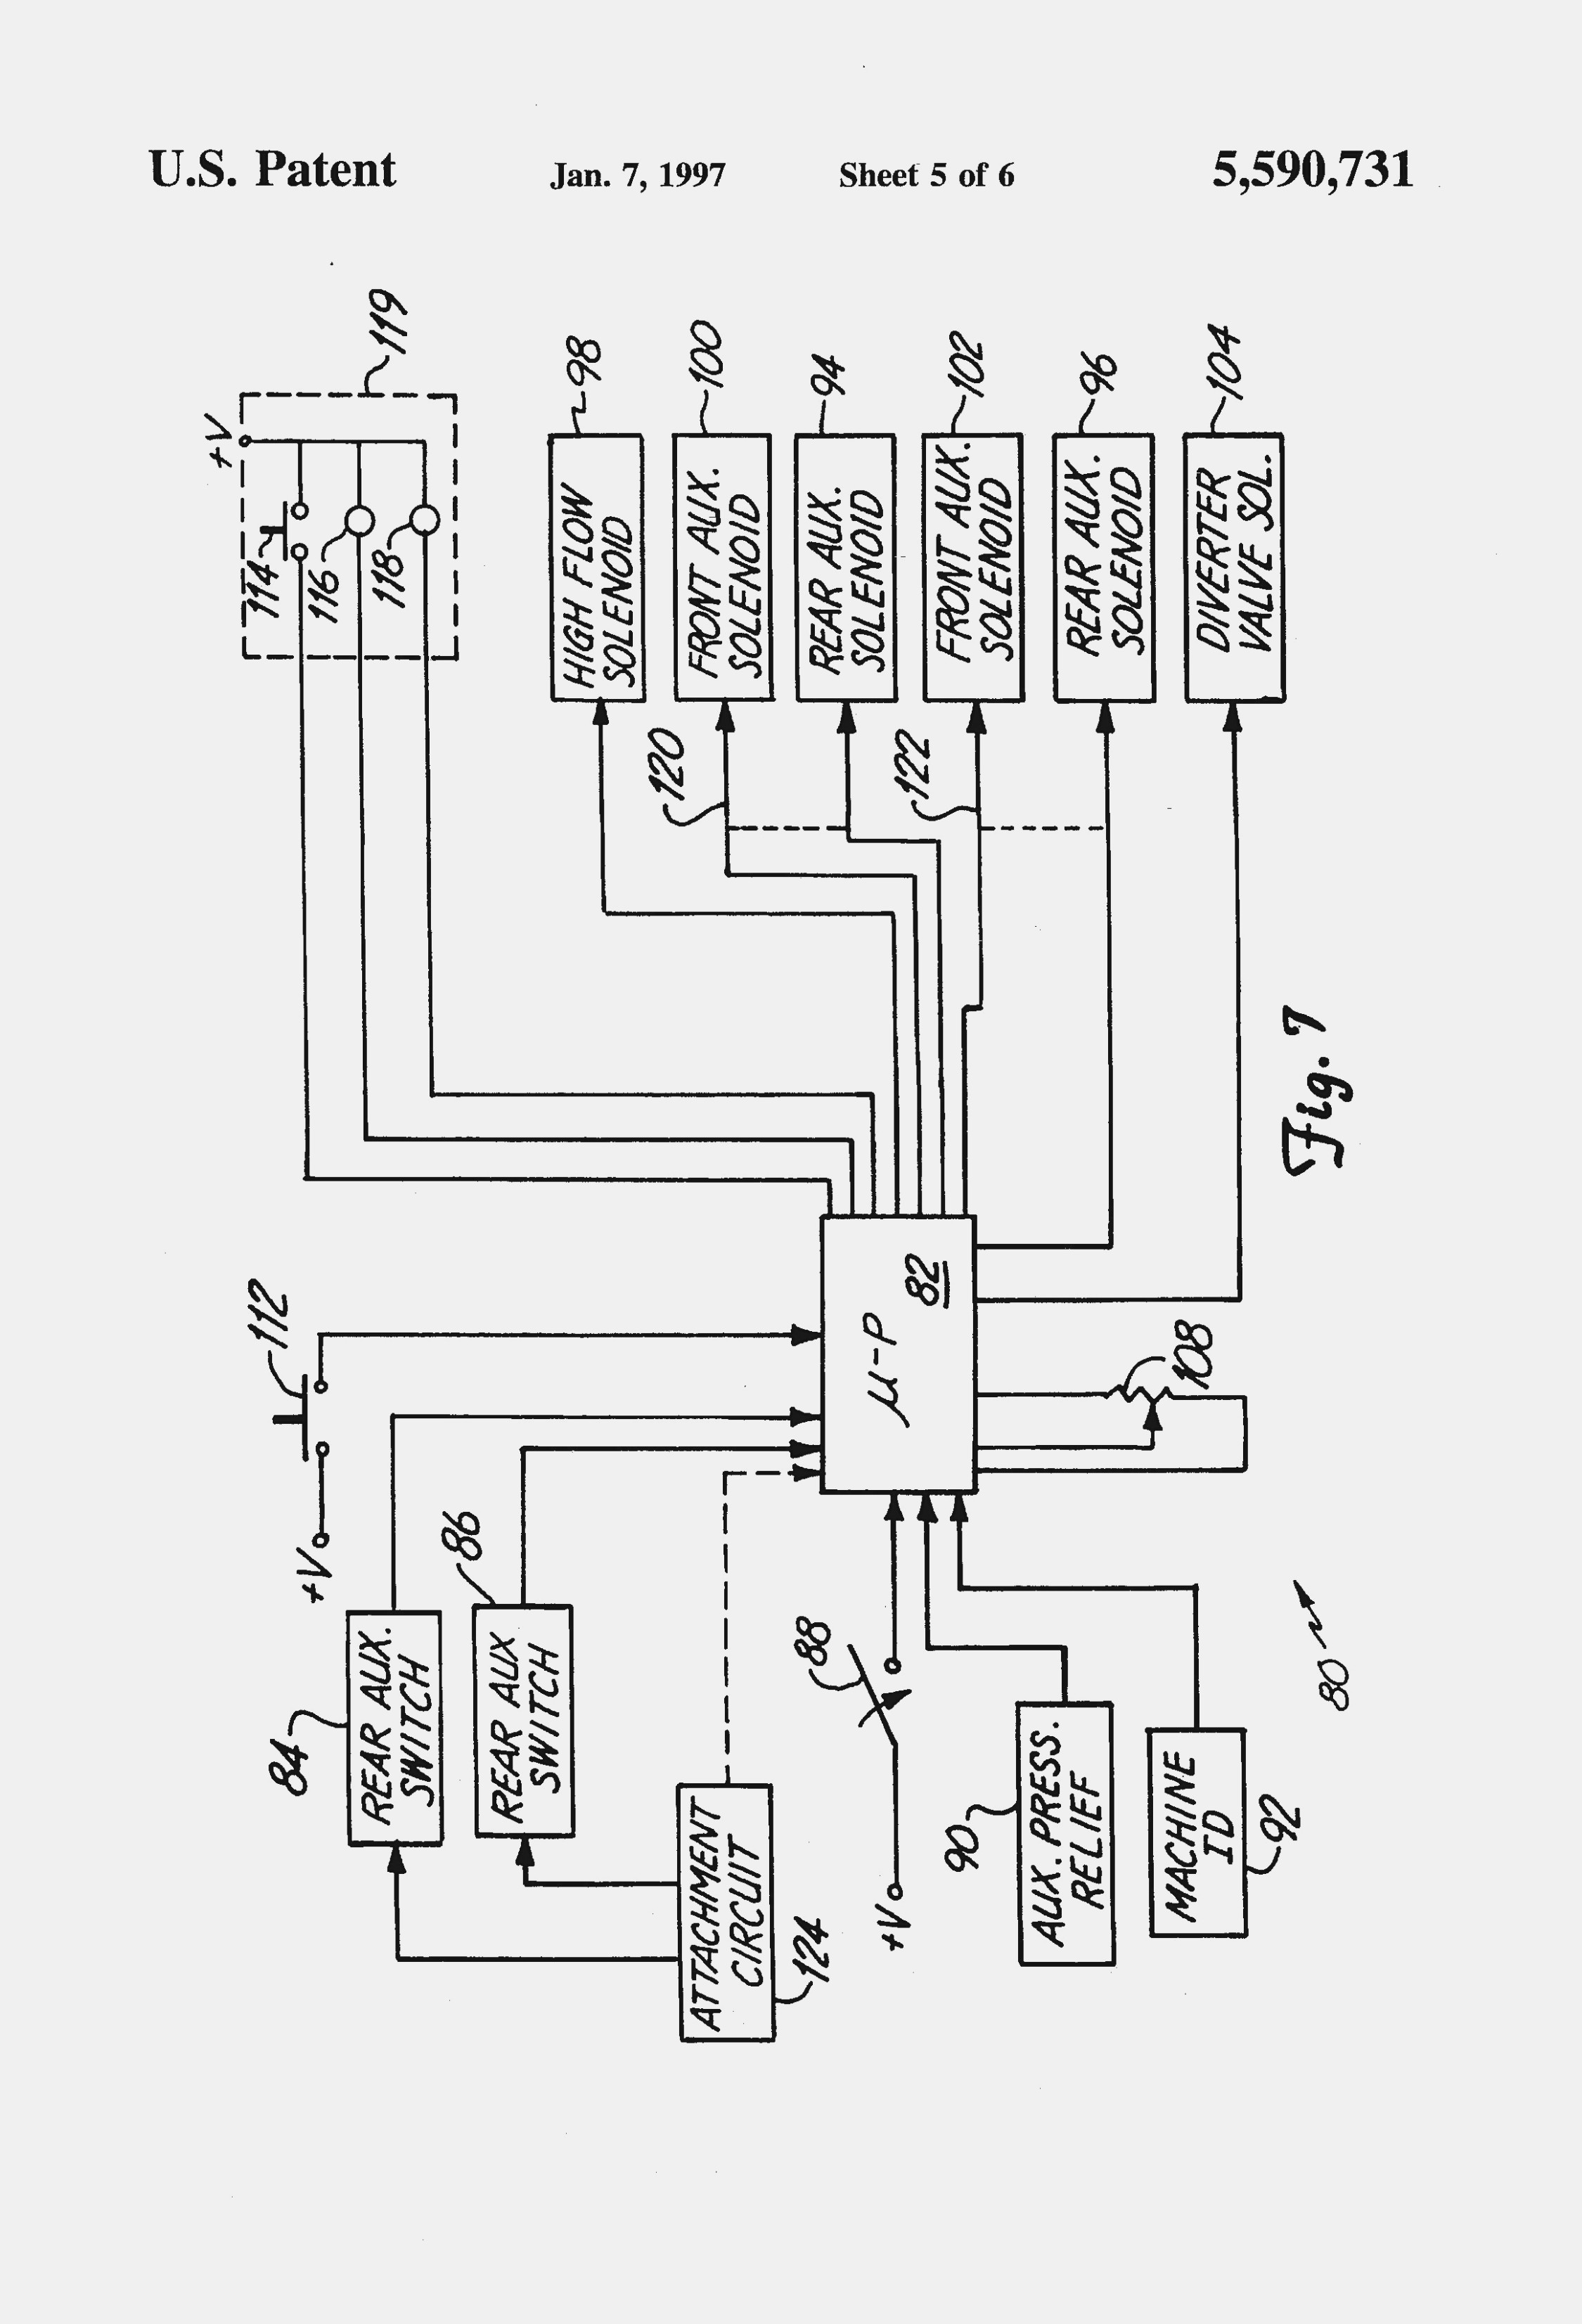 Samsung Dryer Wiring Diagram Wiring Diagram Washing Machine with Dryer with Images